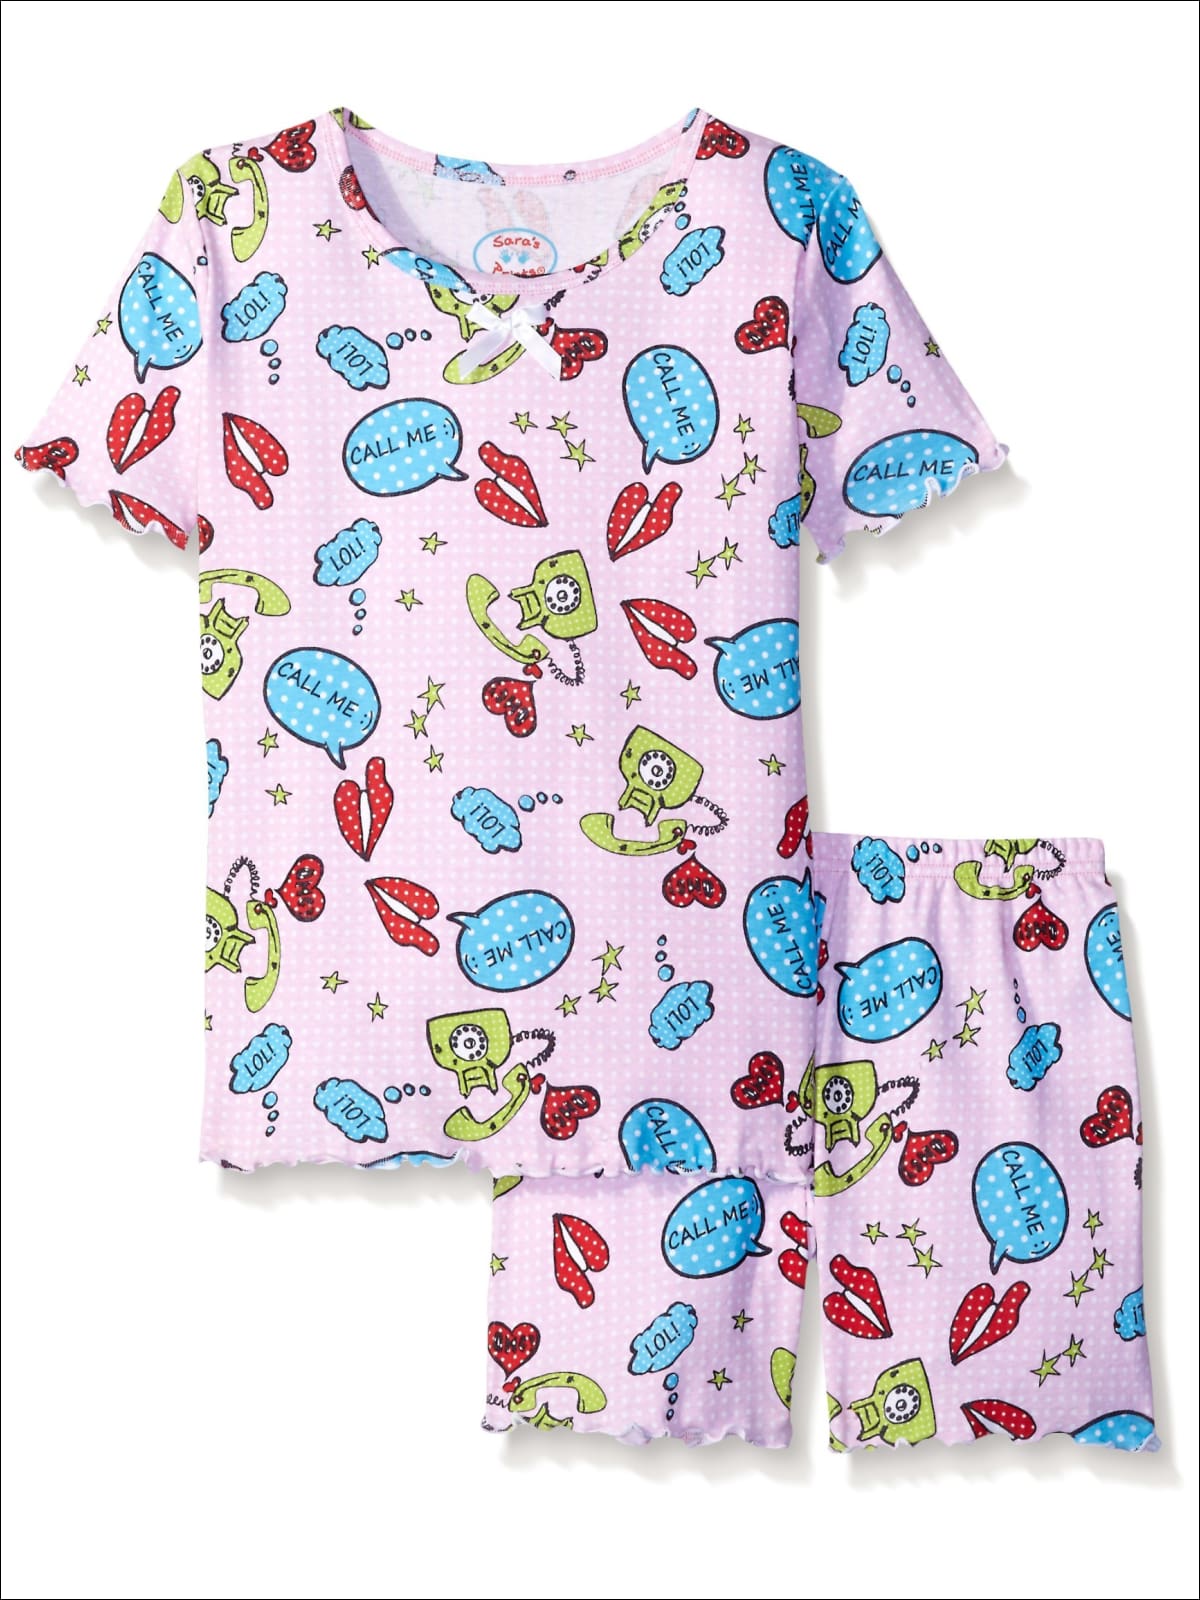 Saras Prints Little Girls Call Me Fitted 2 Piece Short Pajama Set